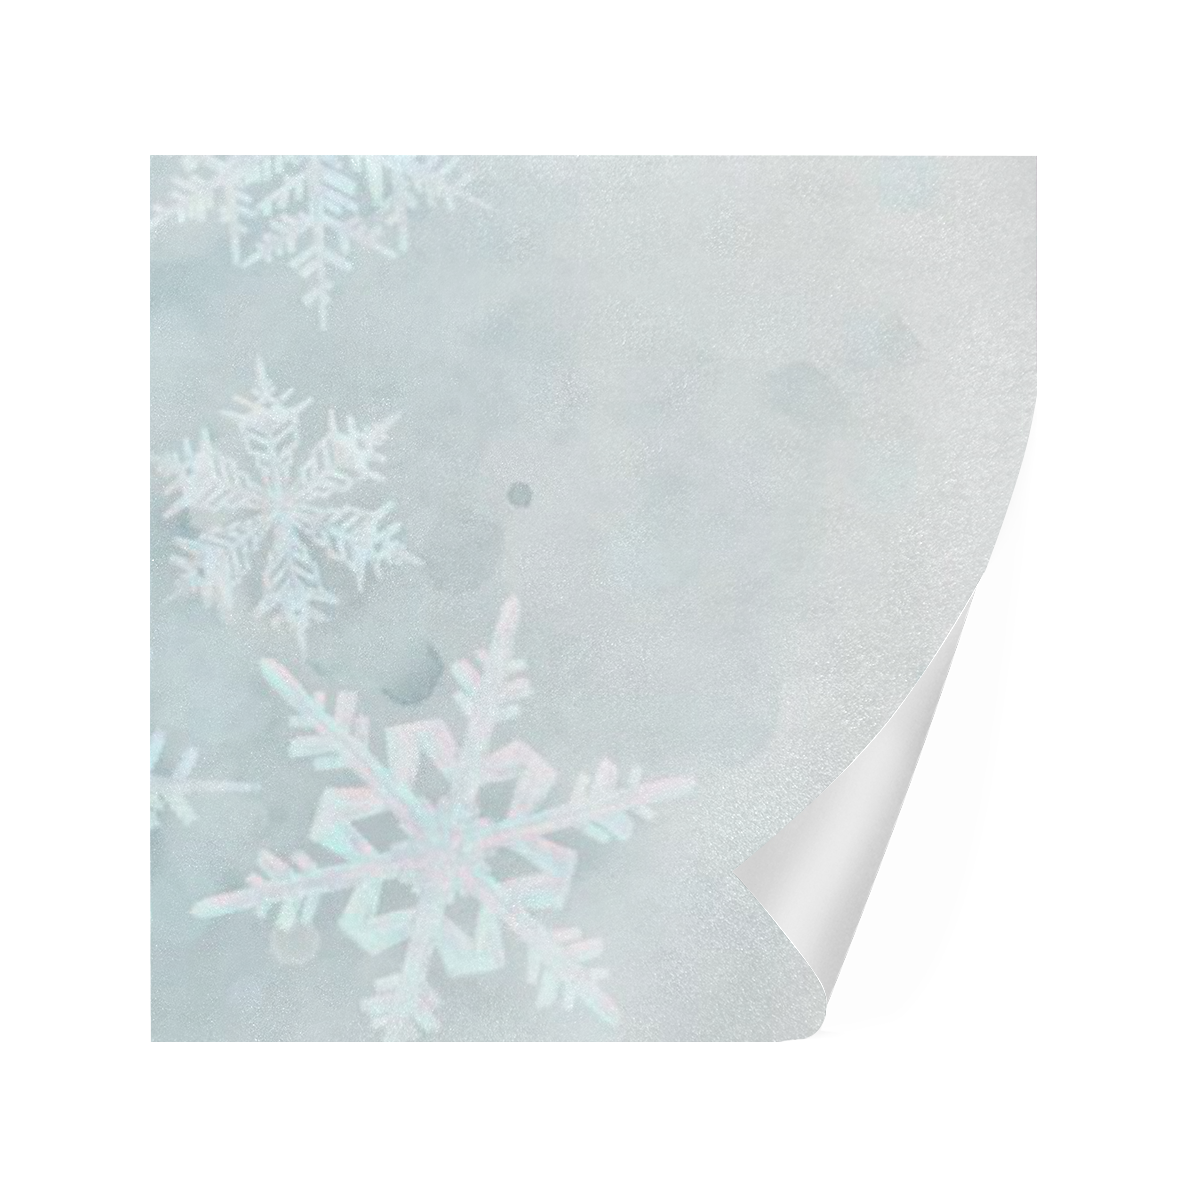 Snowflakes White and blue, Christmas Gift Wrapping Paper 58"x 23" (1 Roll)